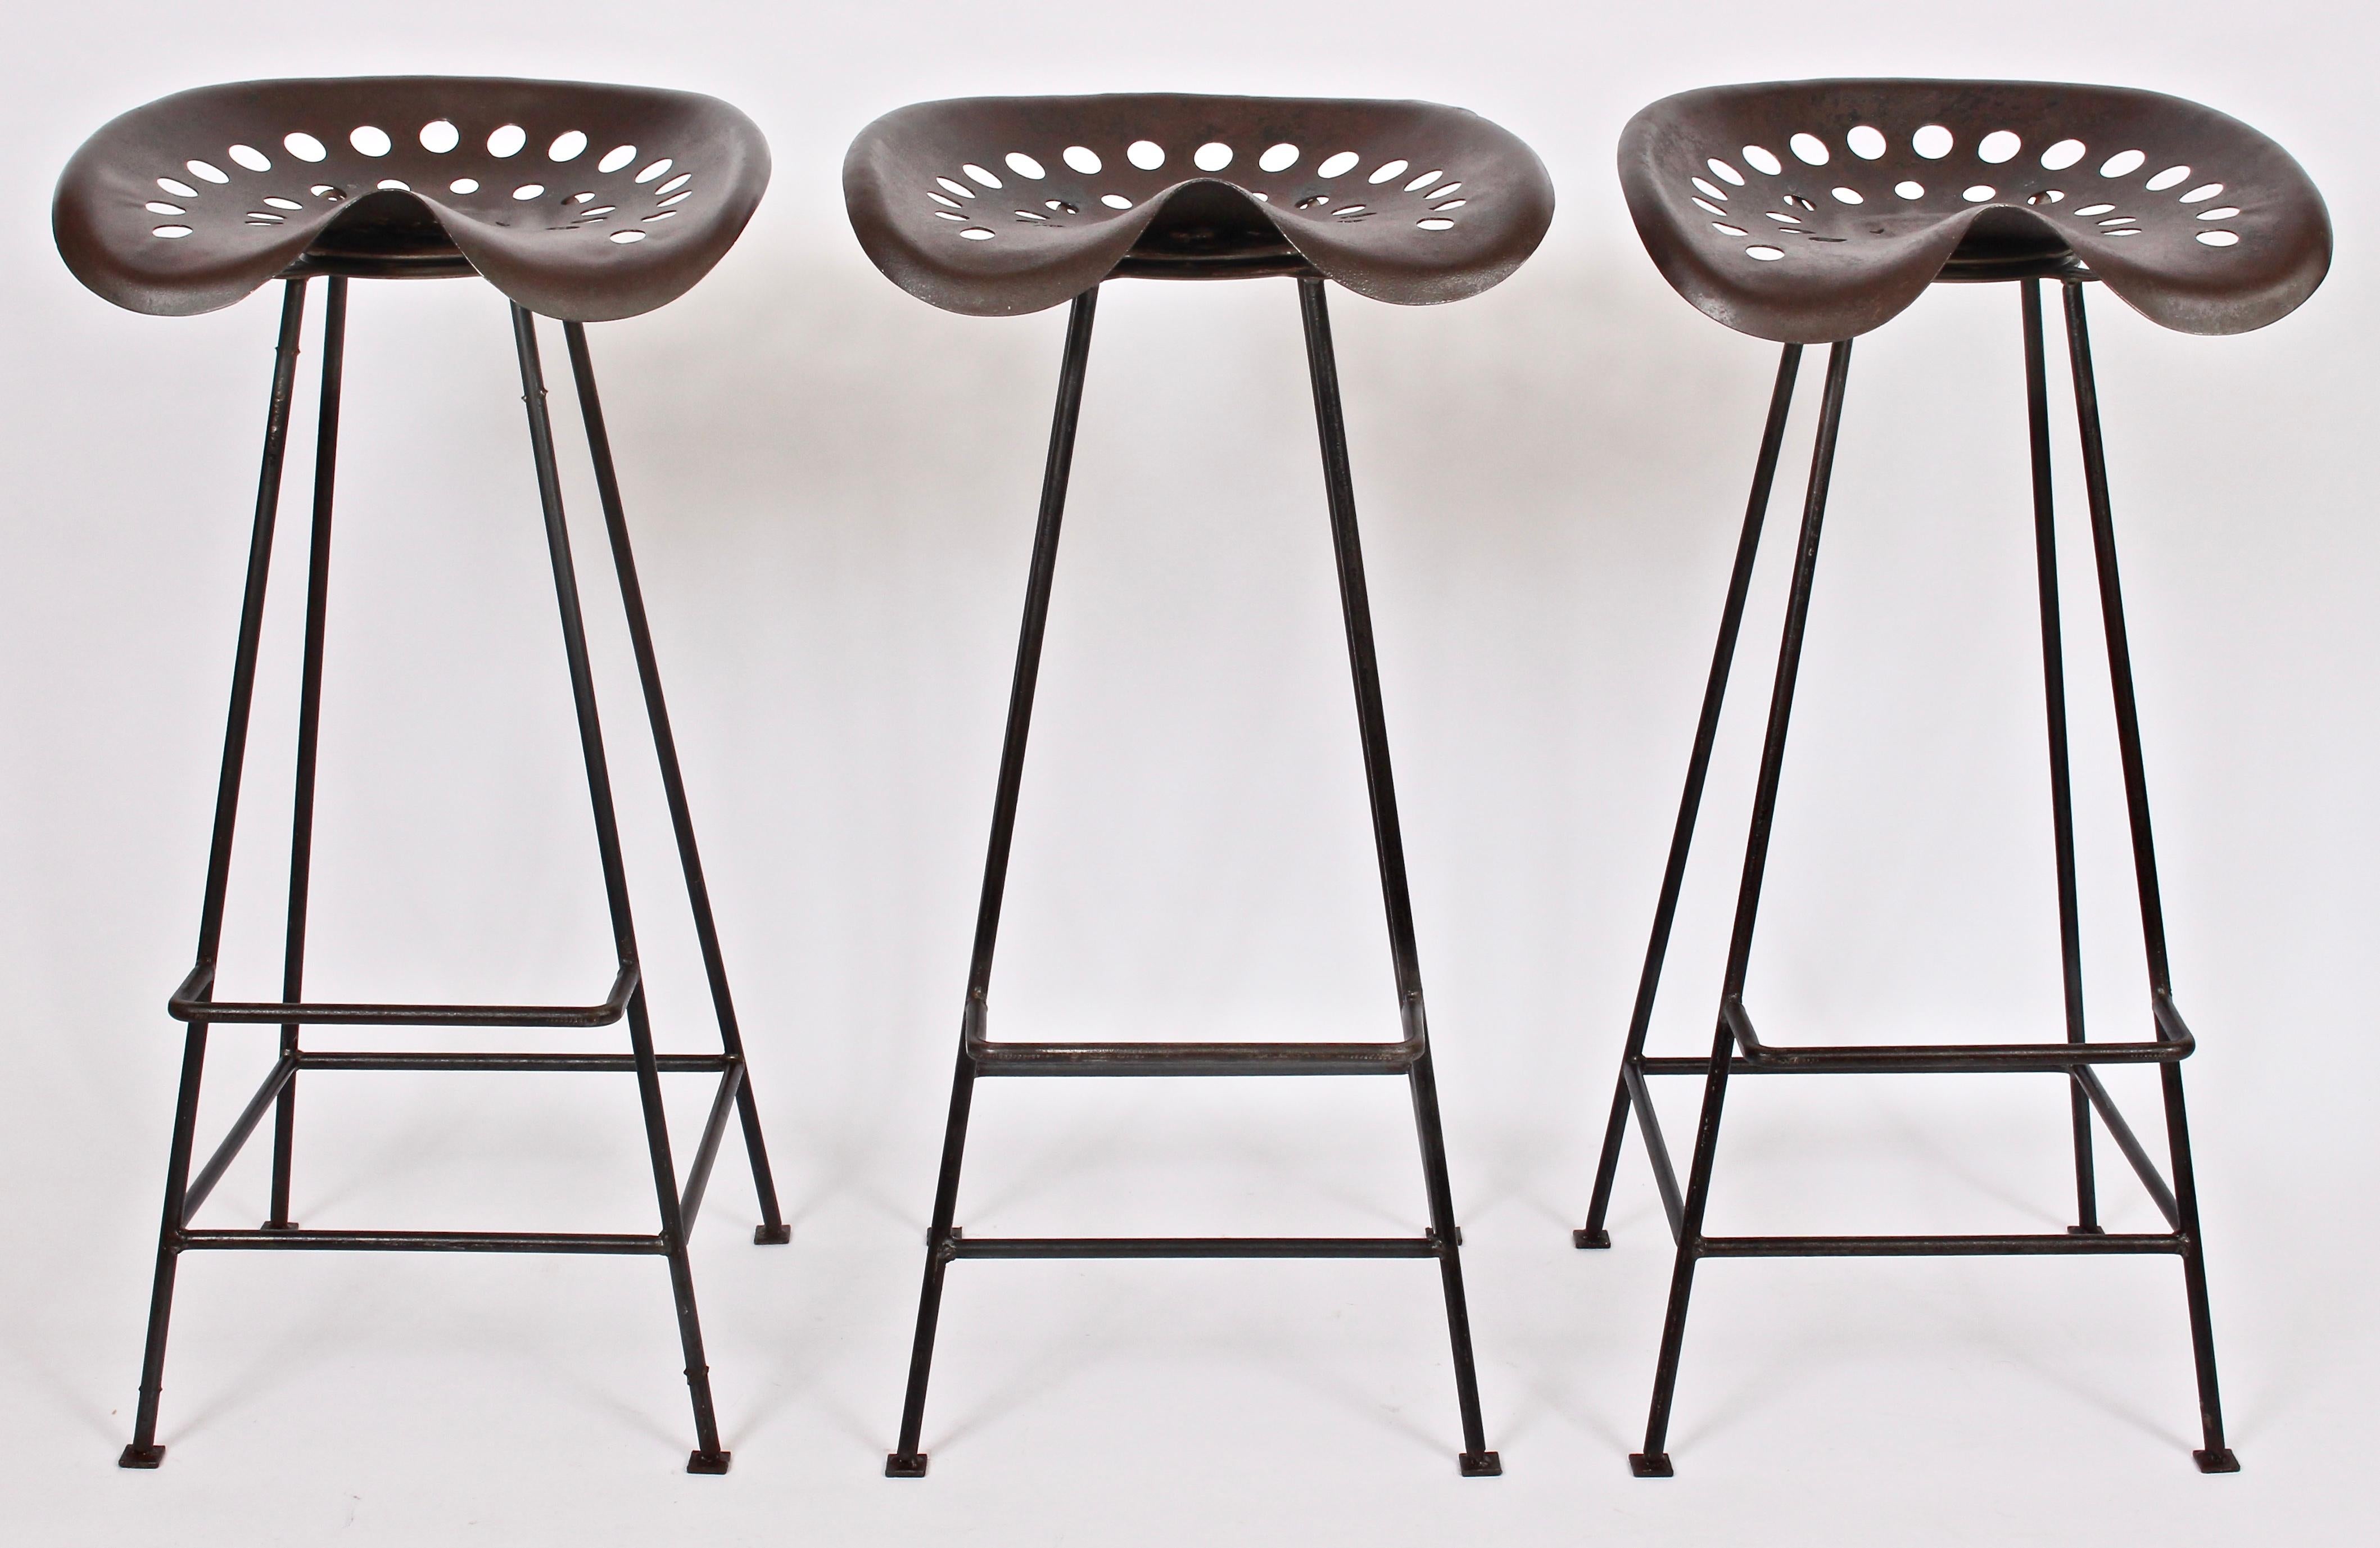 Trio of American Mid Century handcrafted tractor seat bar stools. Featuring a sturdy, open Iron framework, footrests with wide perforated patinated and sealed swivel seats (17